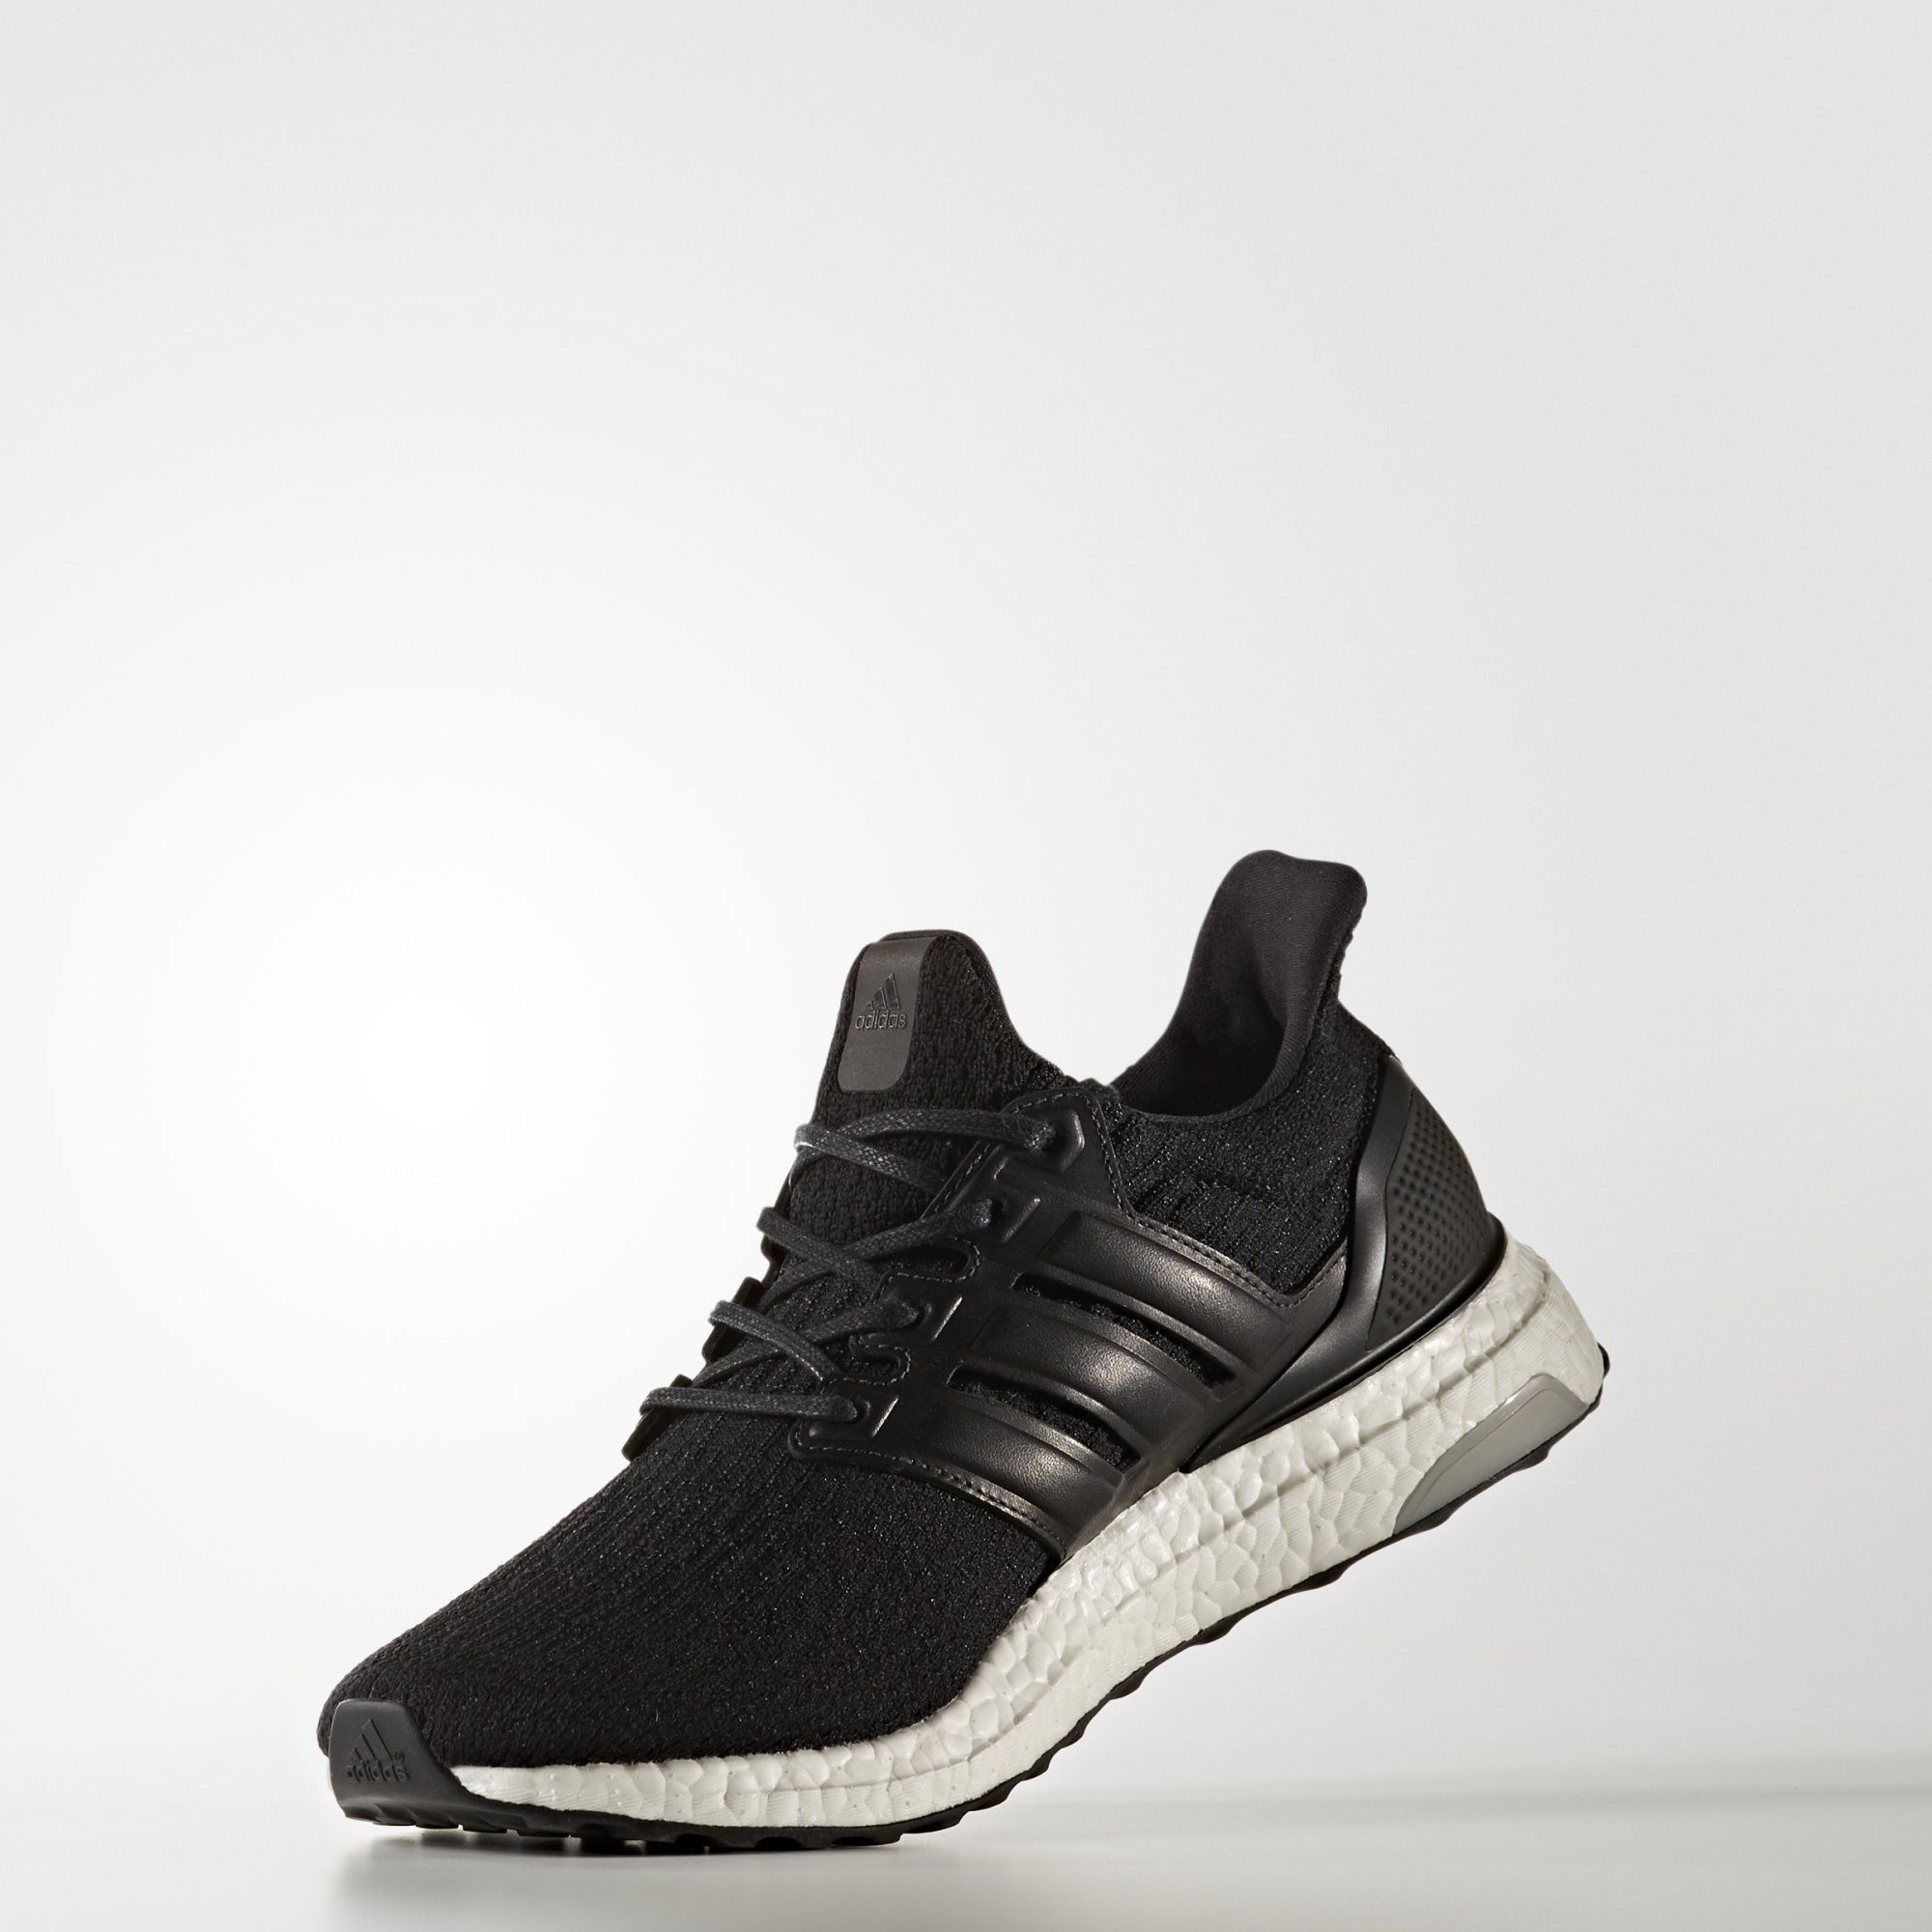 Adidas Ultra Boost
Limited-Edition
Core Black